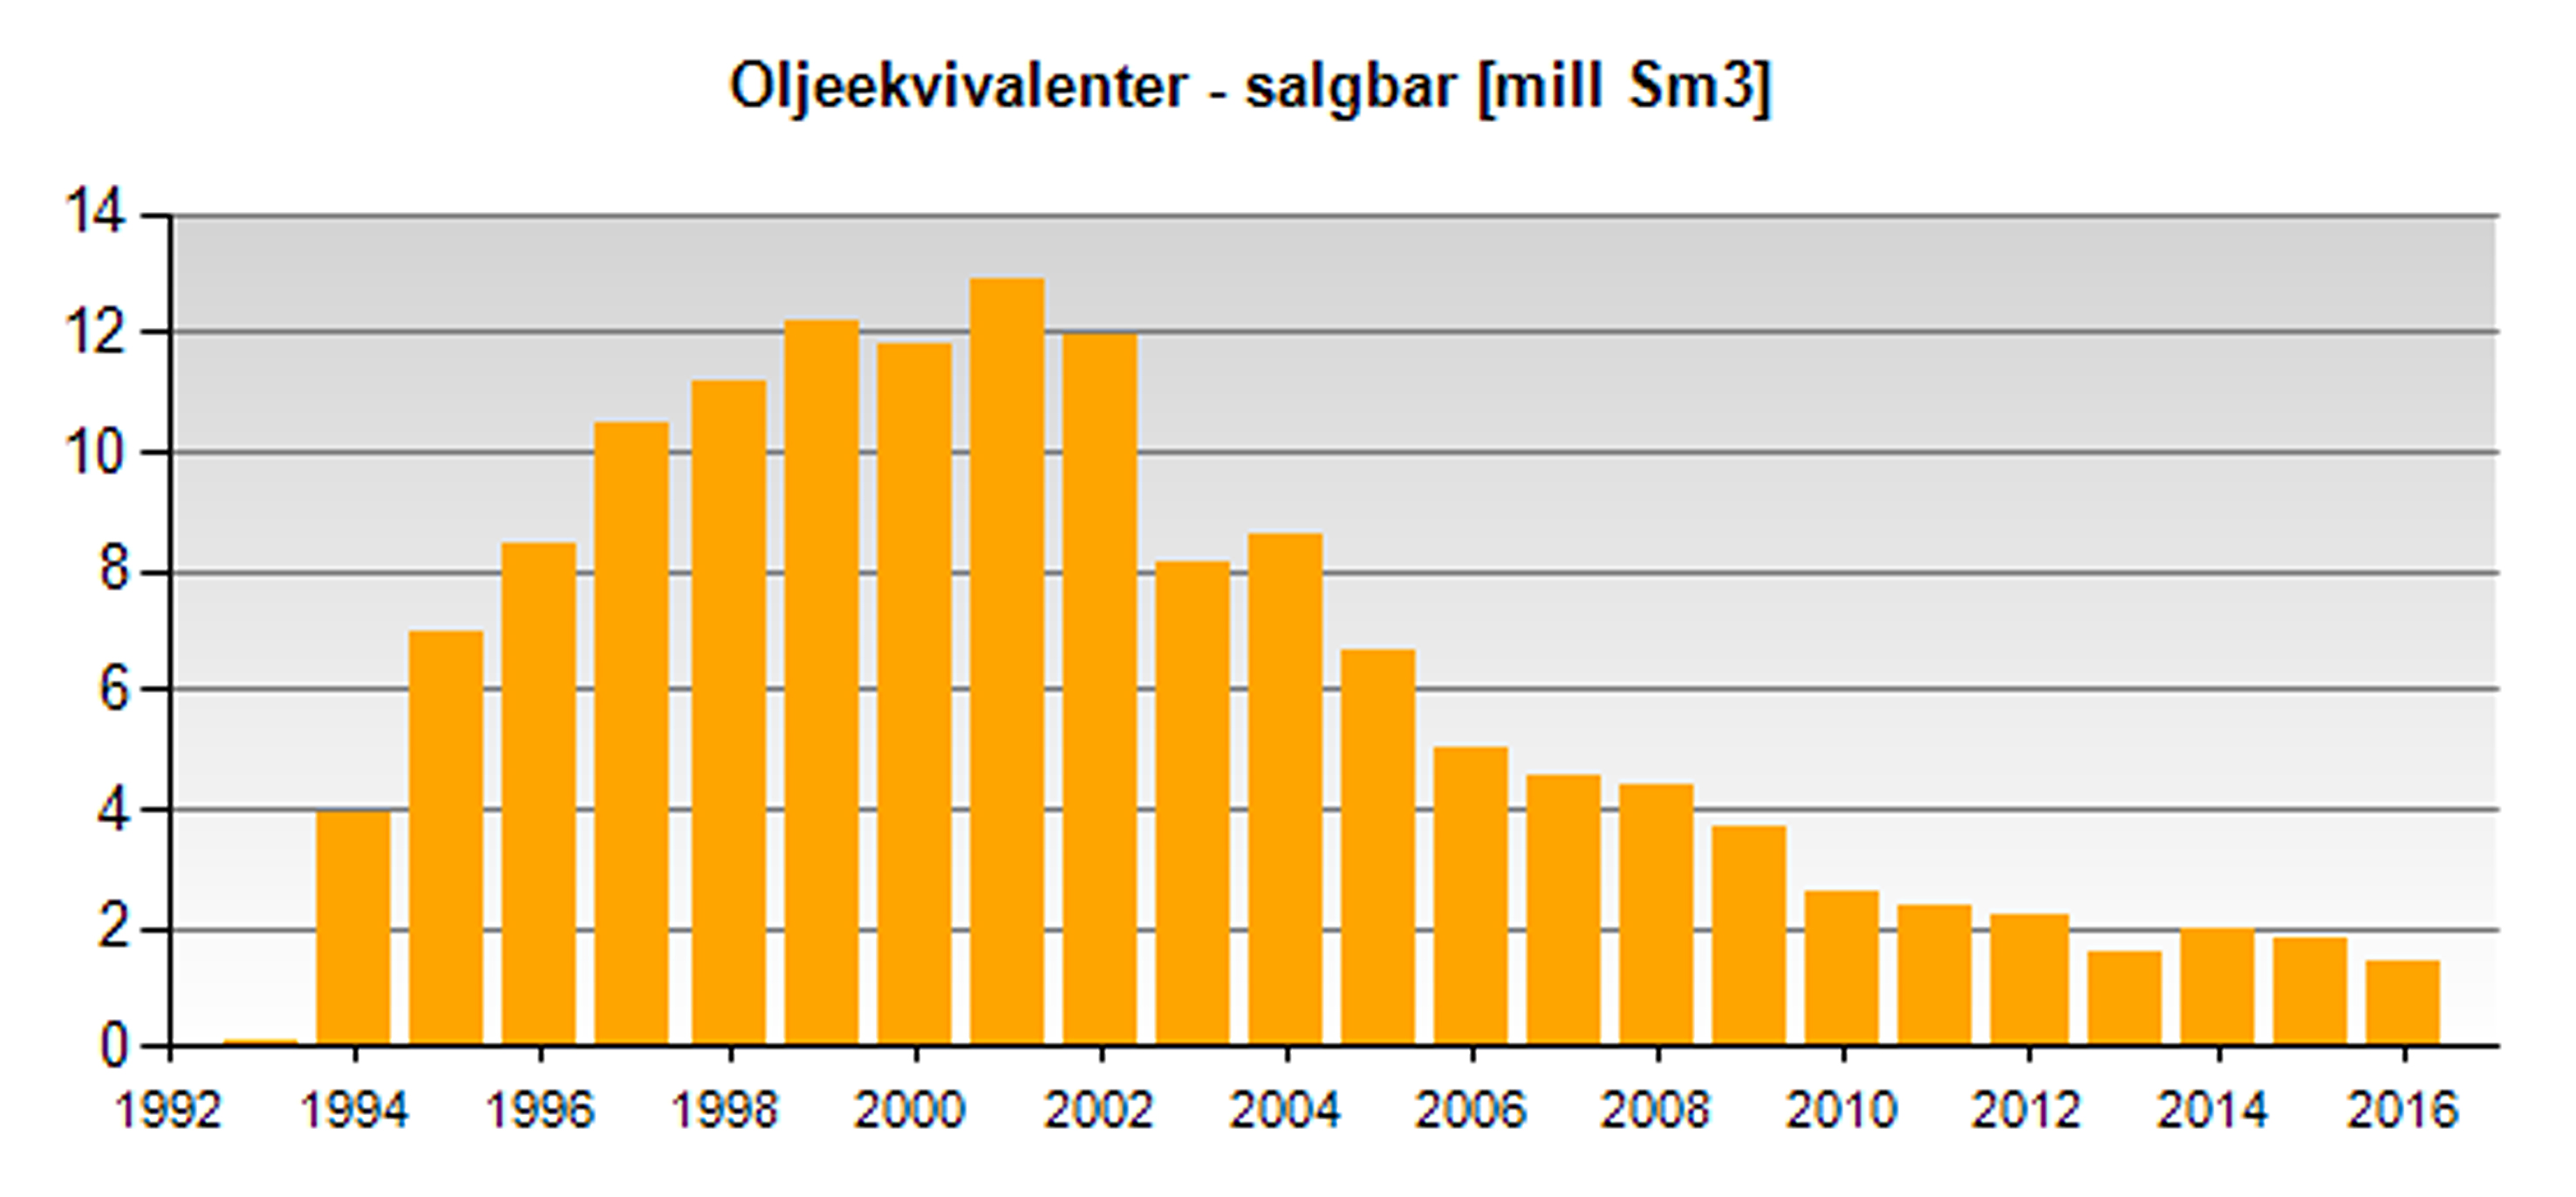 Annual production from Draugen measured in oil equivalent (oe). The latter is a measure of energy which corresponds to burning a specified amount of oil. One oe equals the amount of energy released when one cubic metre of crude oil is burnt. It is used by Norway’s petroleum administration to specify the total energy content of all types of petroleum in a deposit or field by summing equivalent quantities of oil, gas, natural gas liquids (NGL) and condensate.